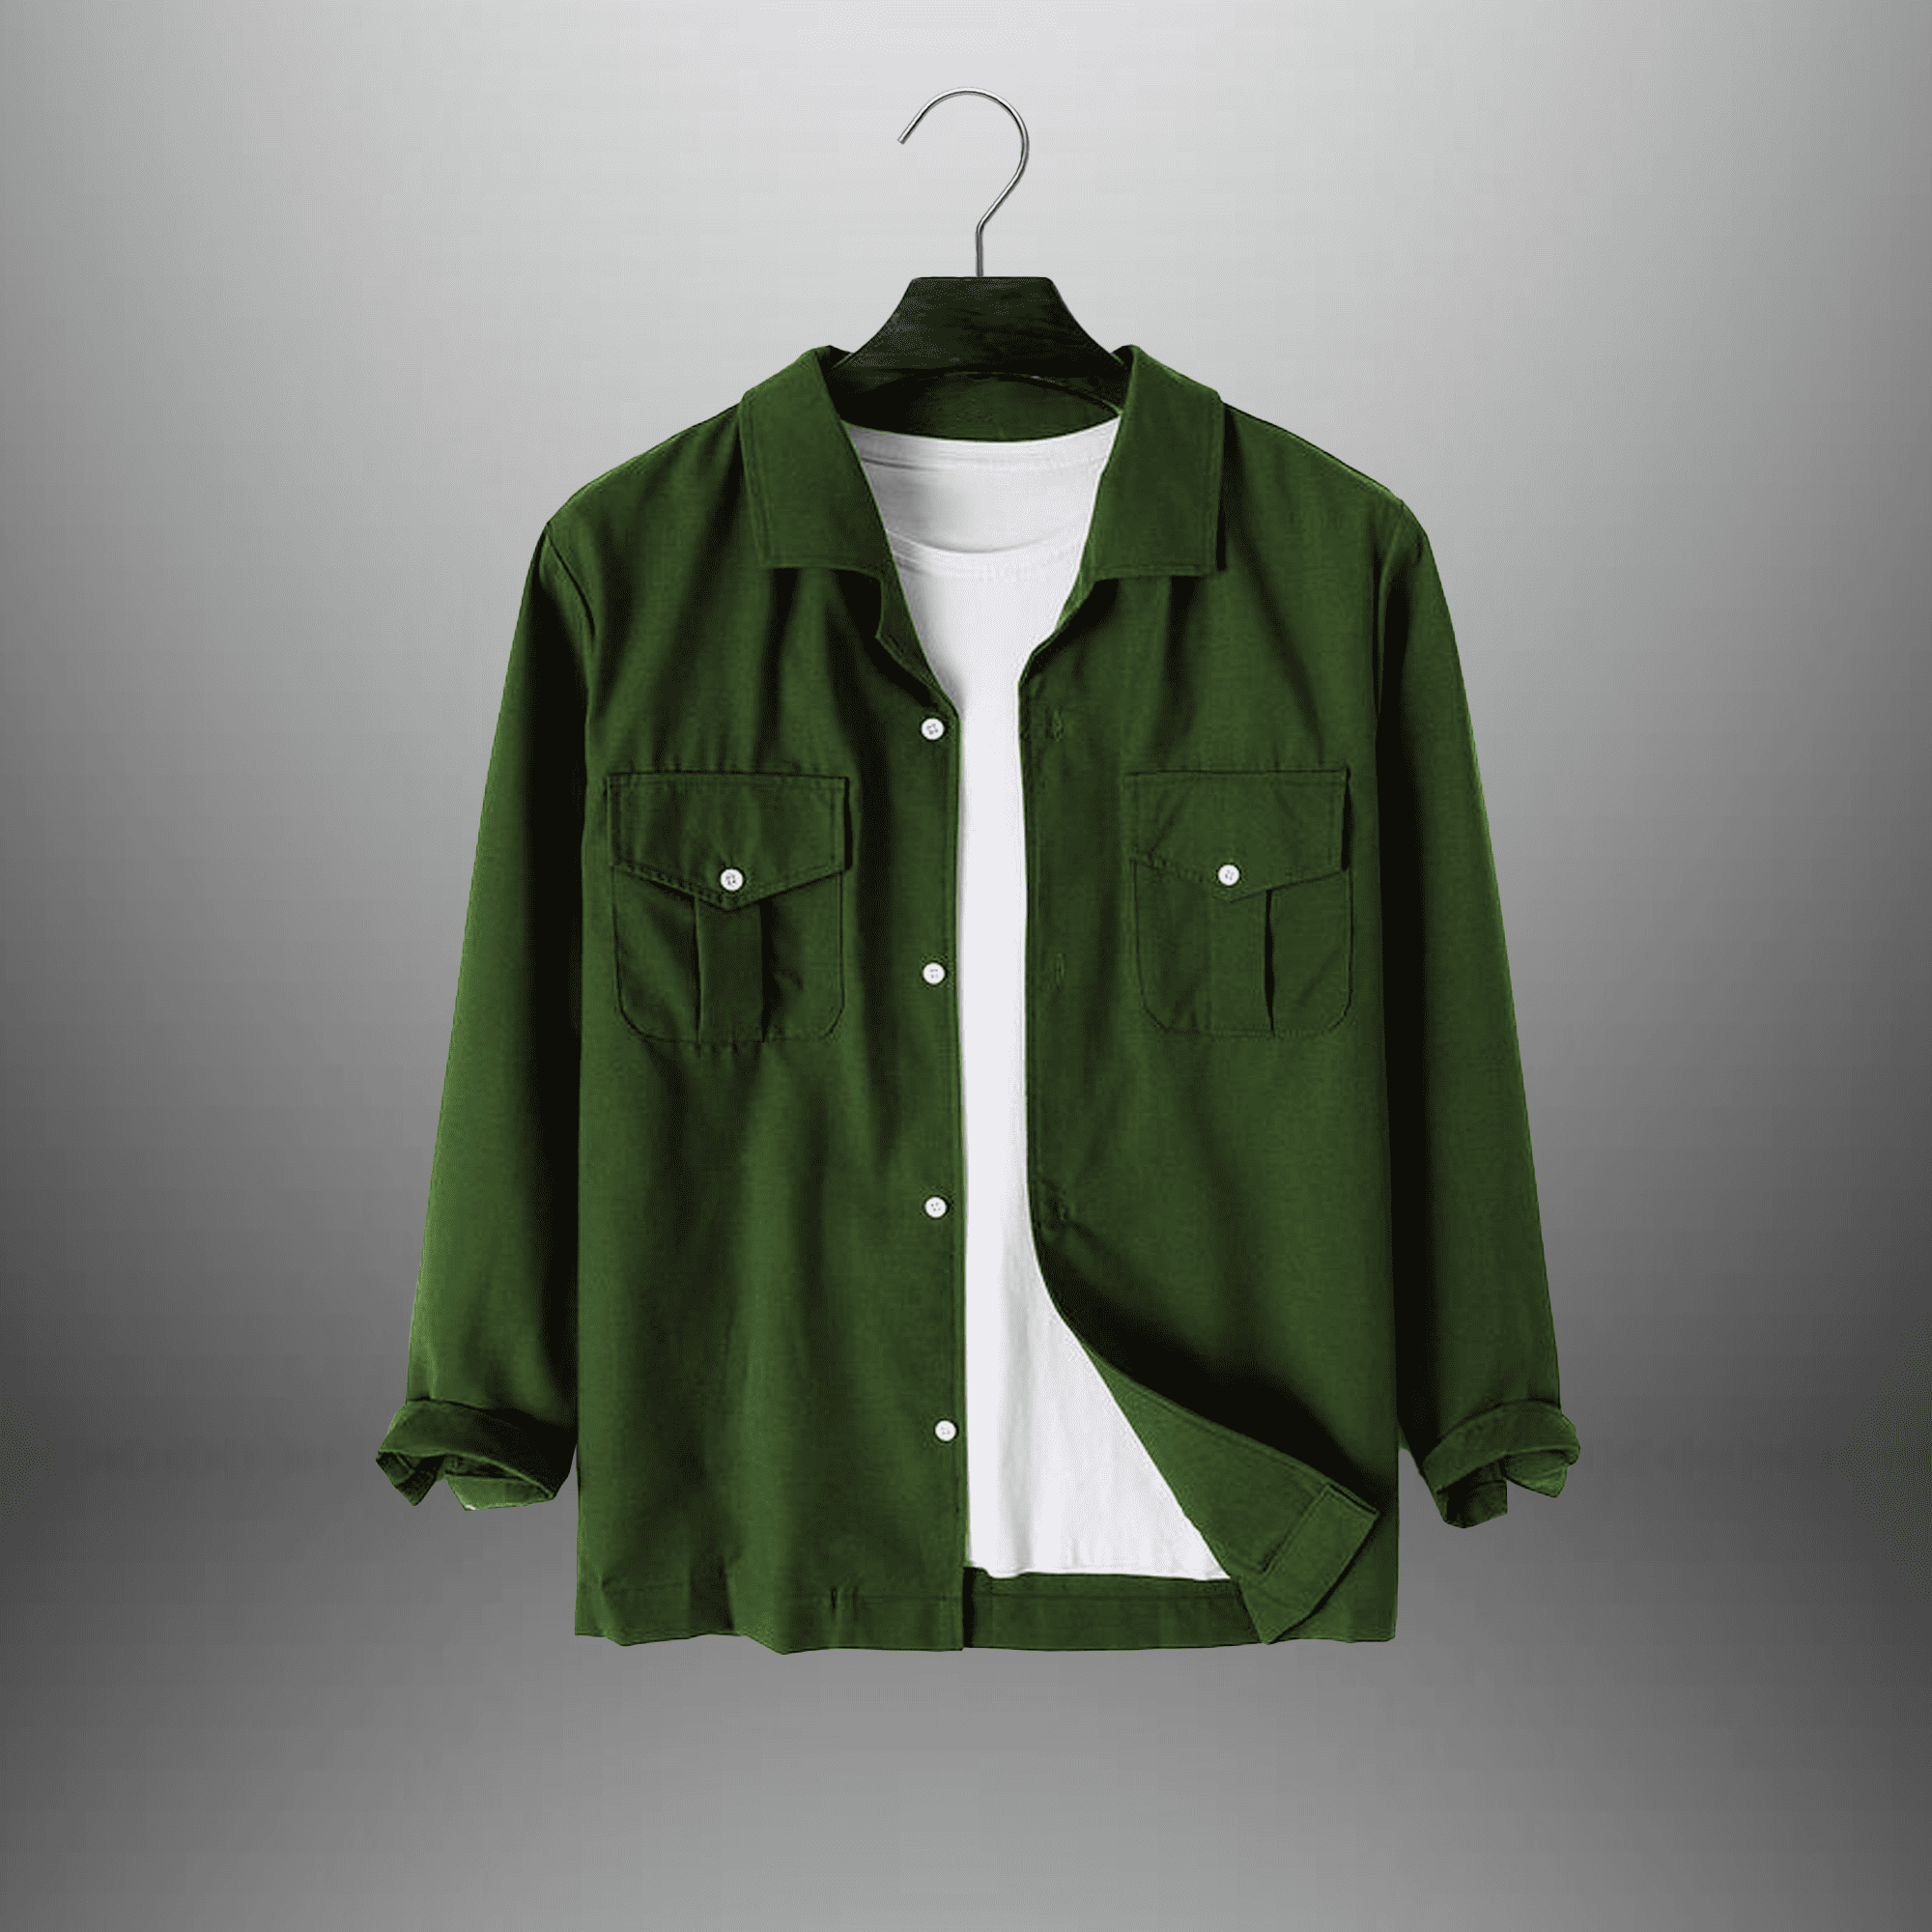 Men's Green Shirt with Pockets and A Plain white T-shirt-RMS037